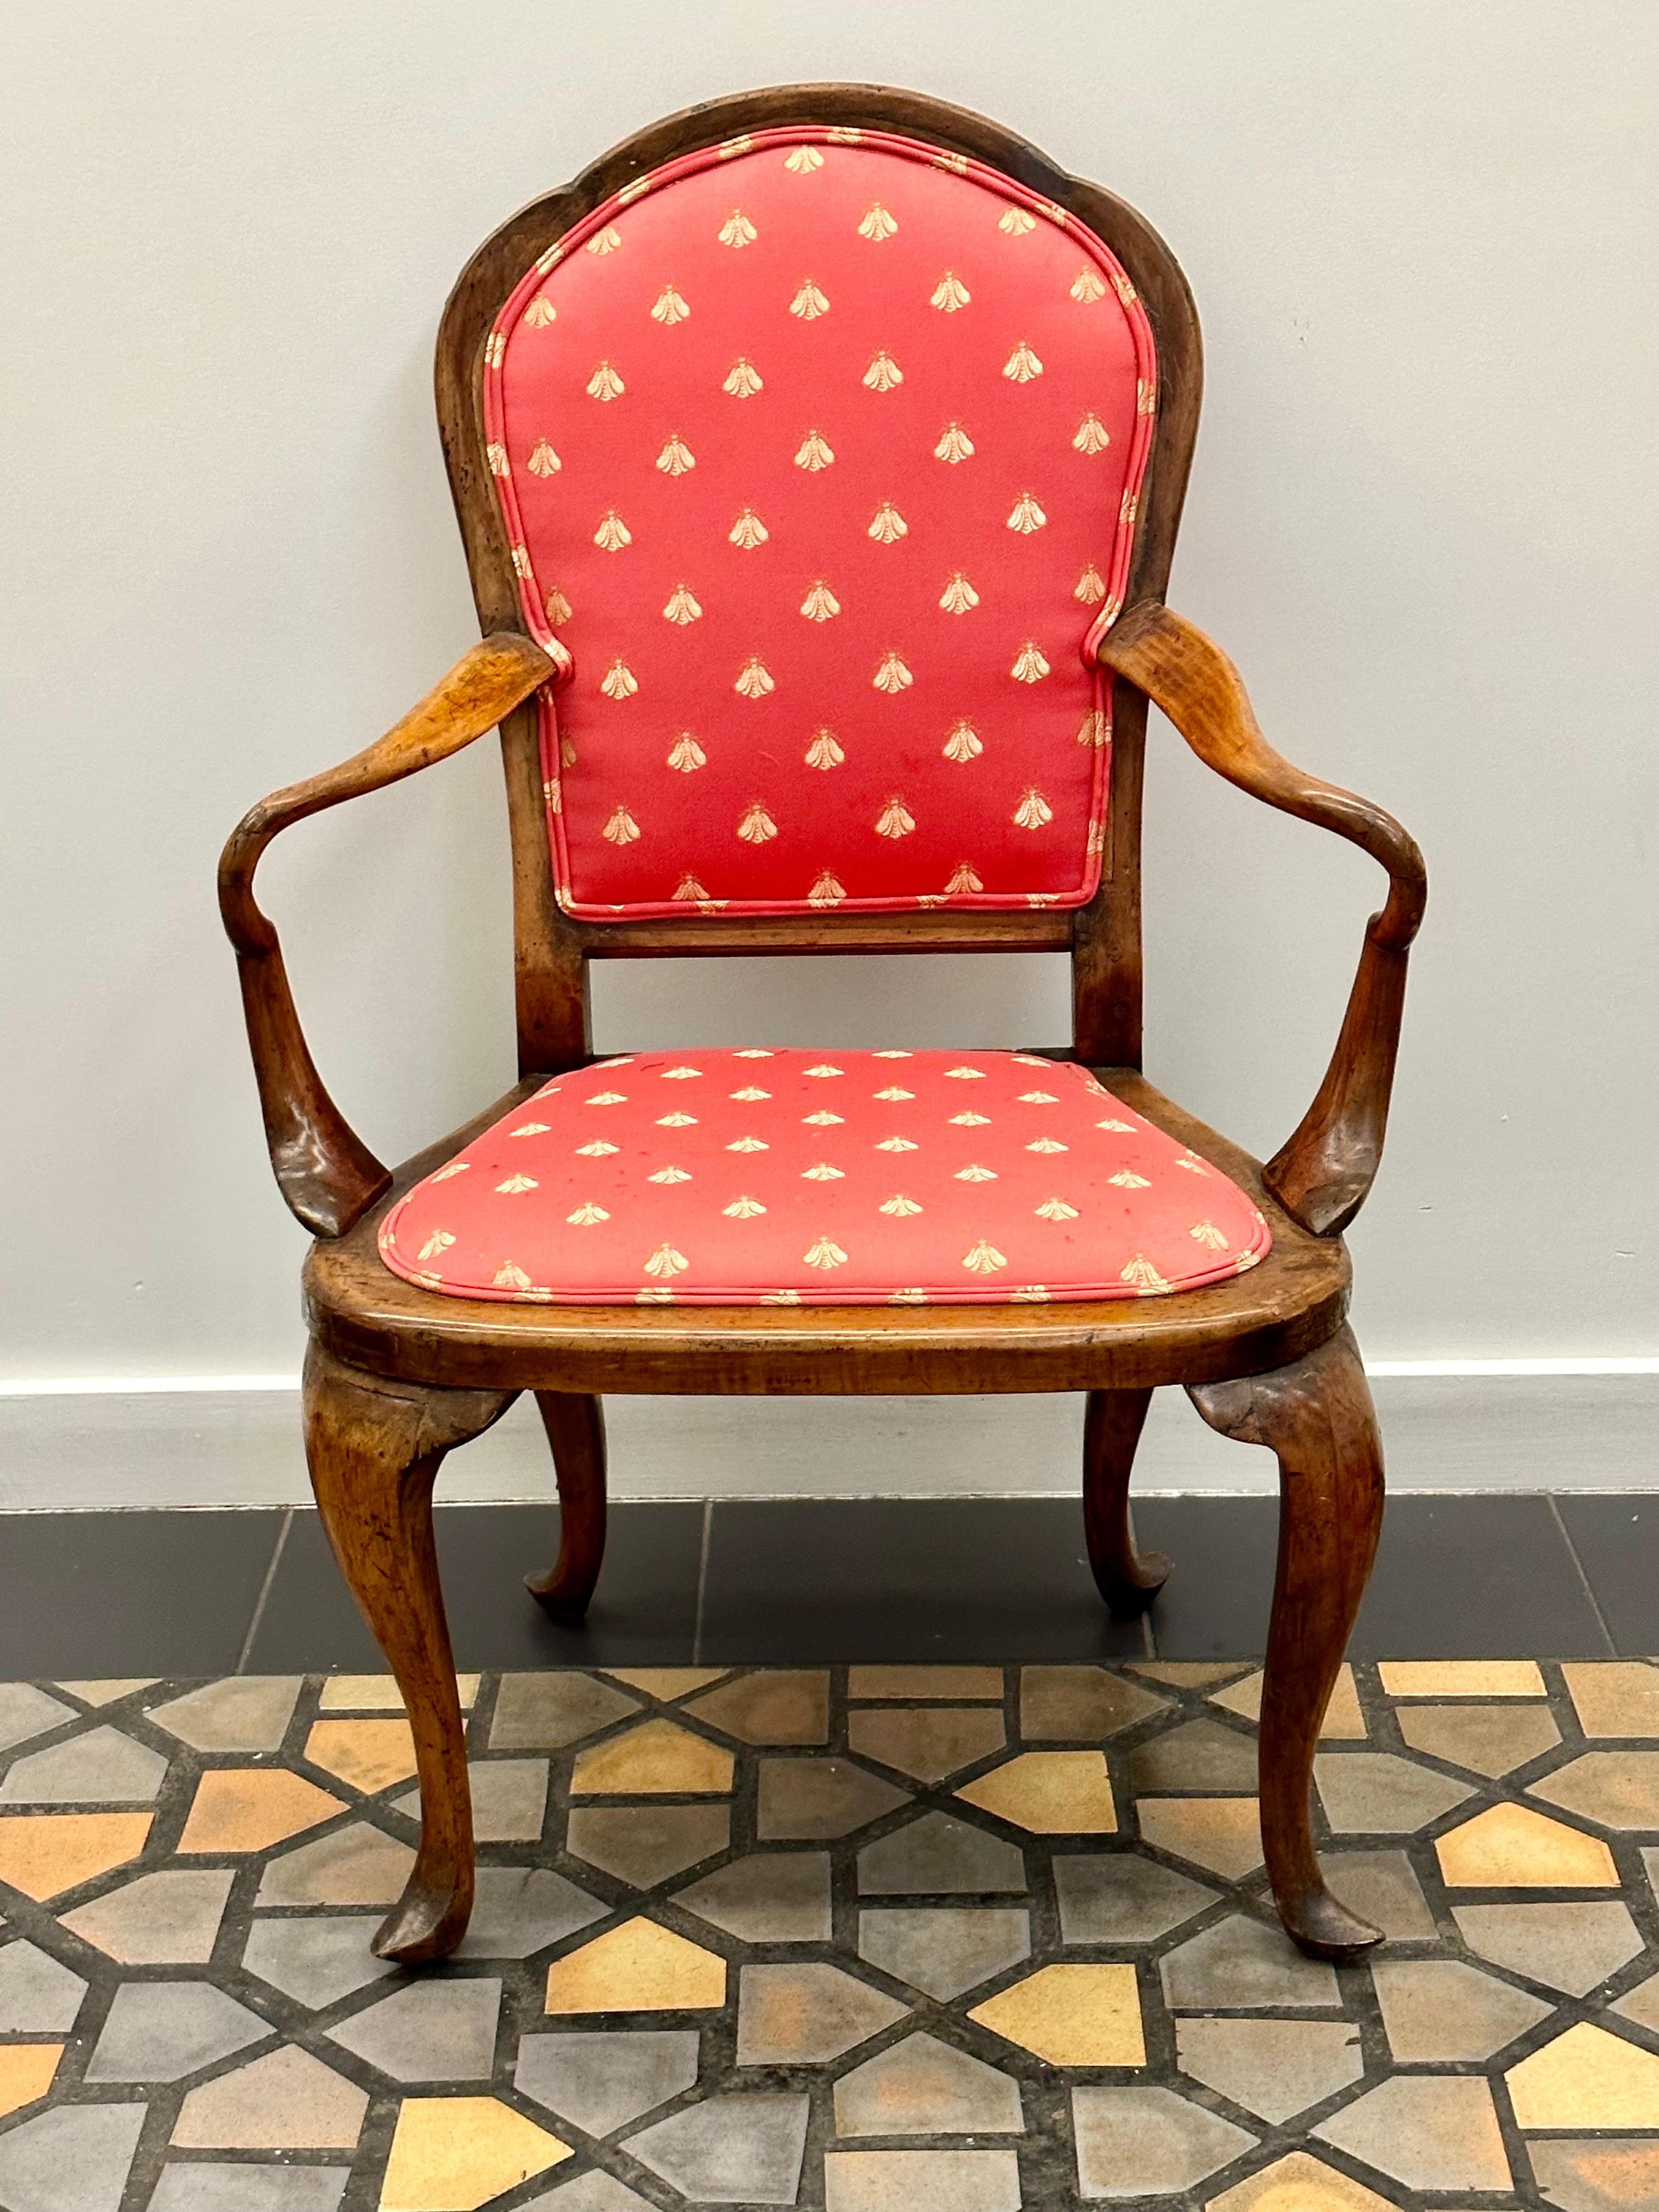 Queen Anne chair made of walnut with upholstered seat.